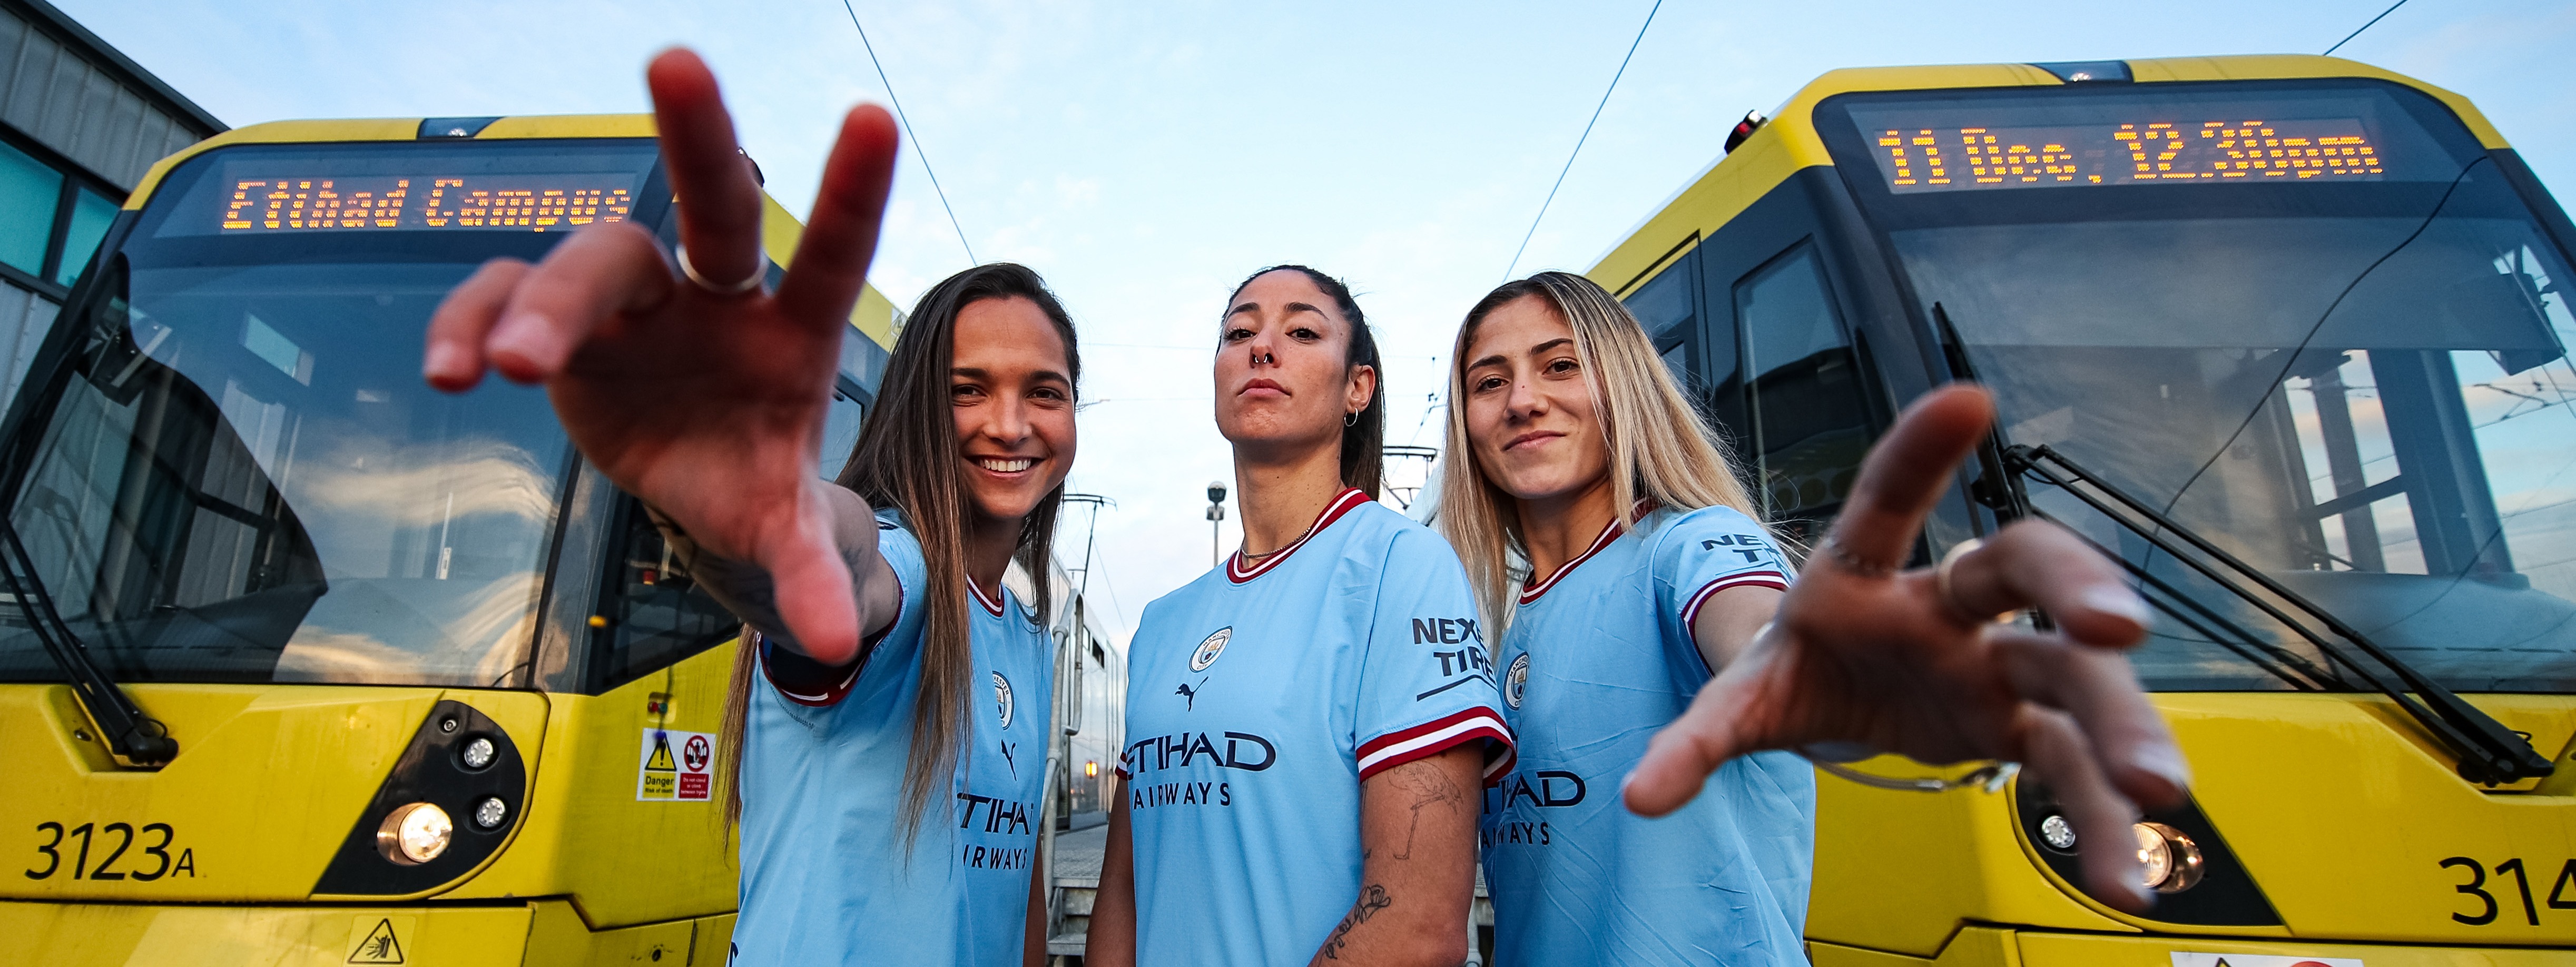 Manchester city womens team with metrolink trams